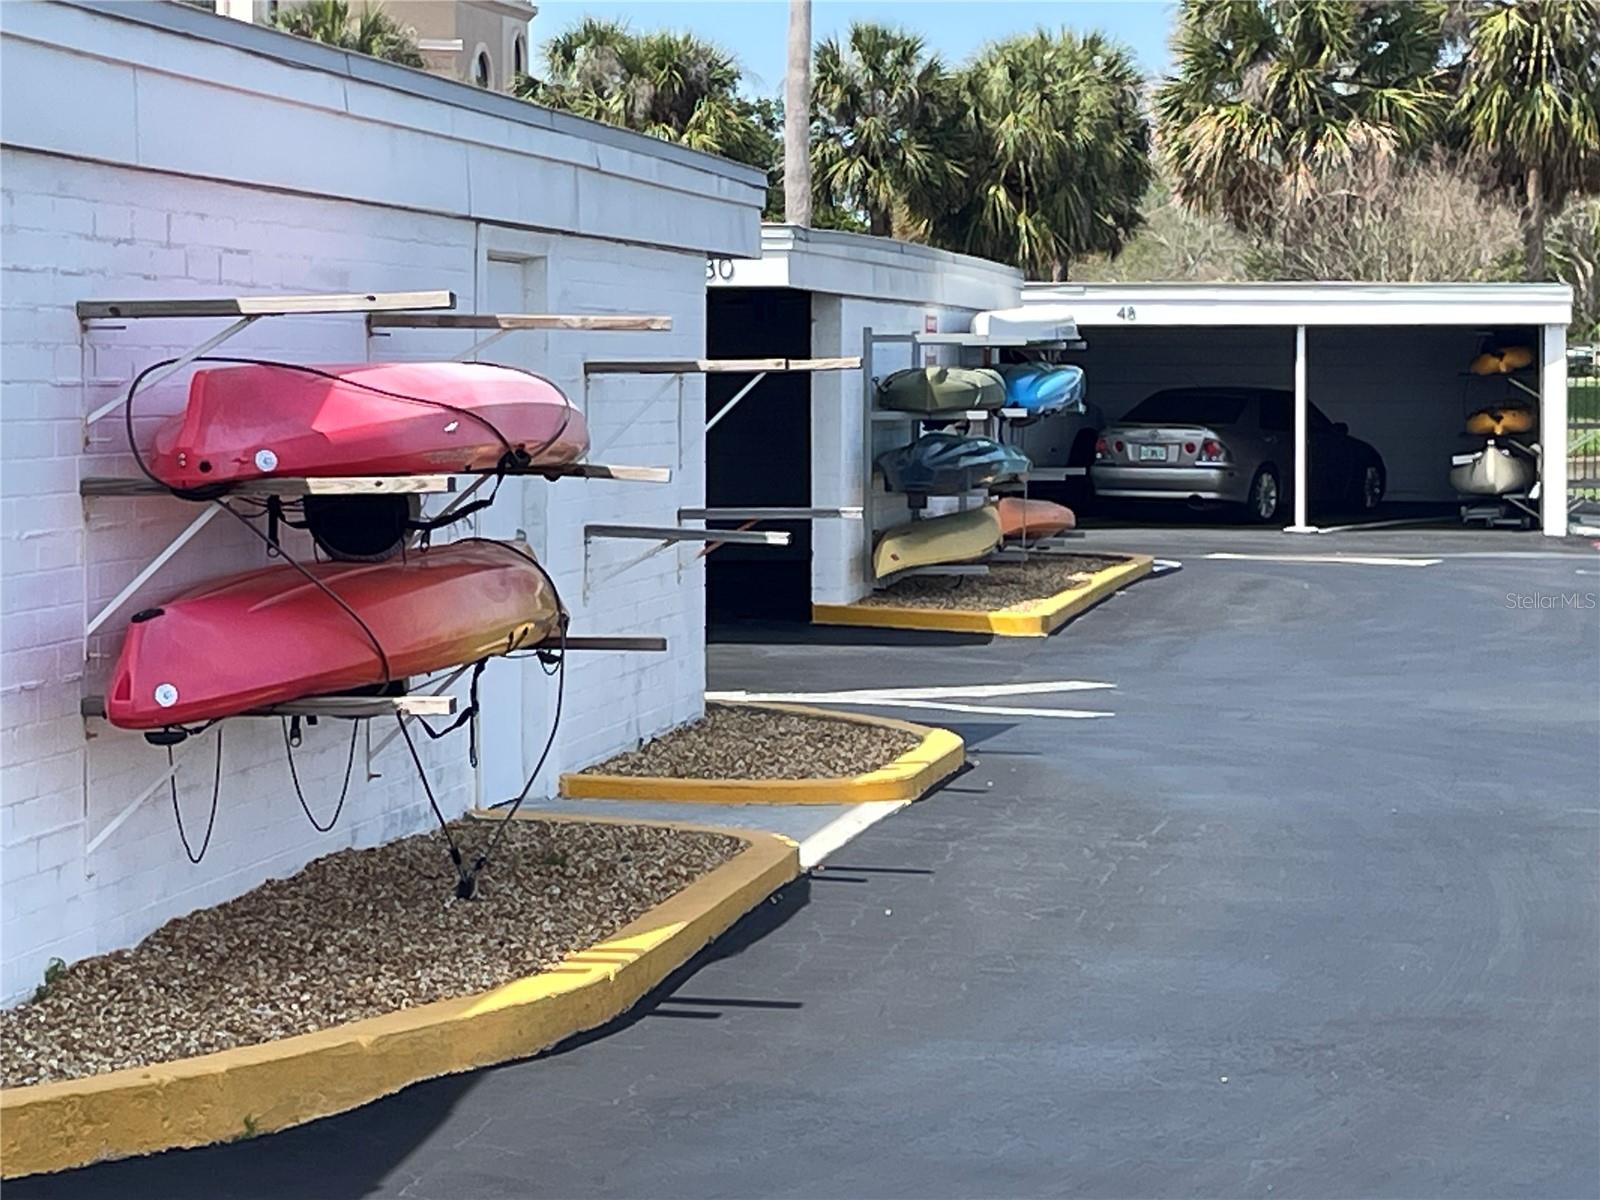 Storage areas for small watercraft/small monthly fee.